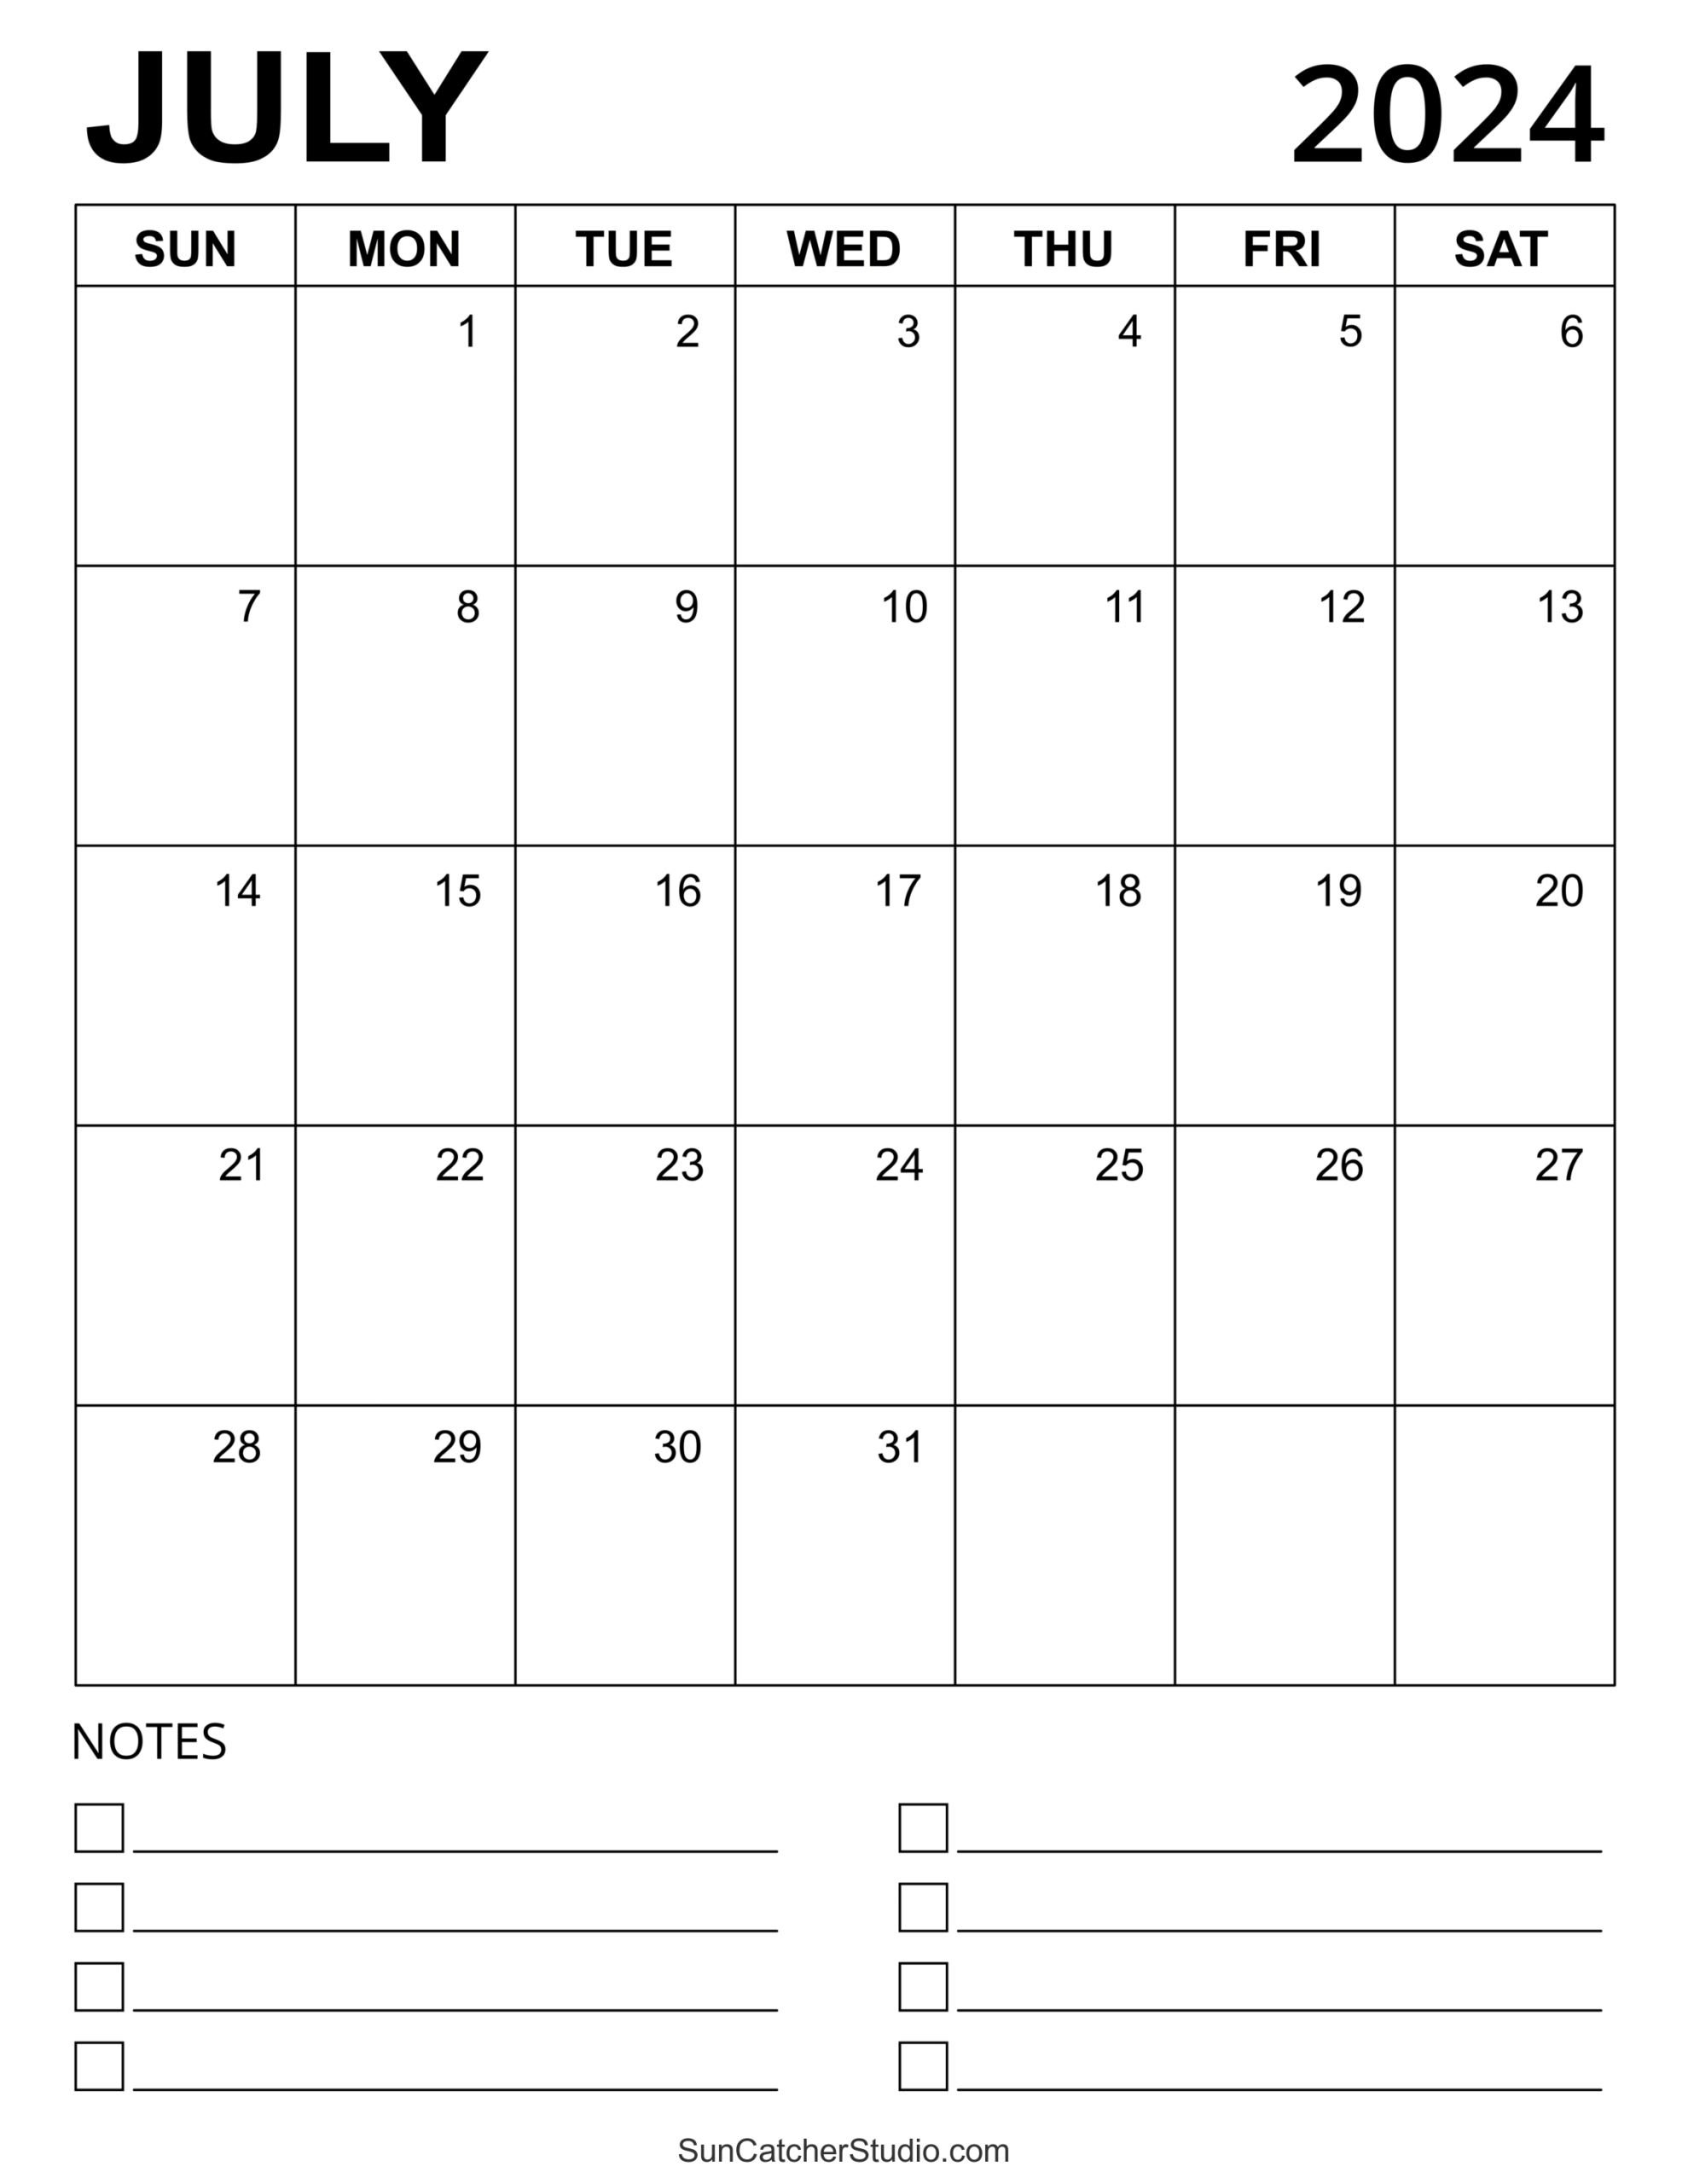 July 2024 Calendar (Free Printable) – Diy Projects, Patterns | Calendar July 2024 With Notes